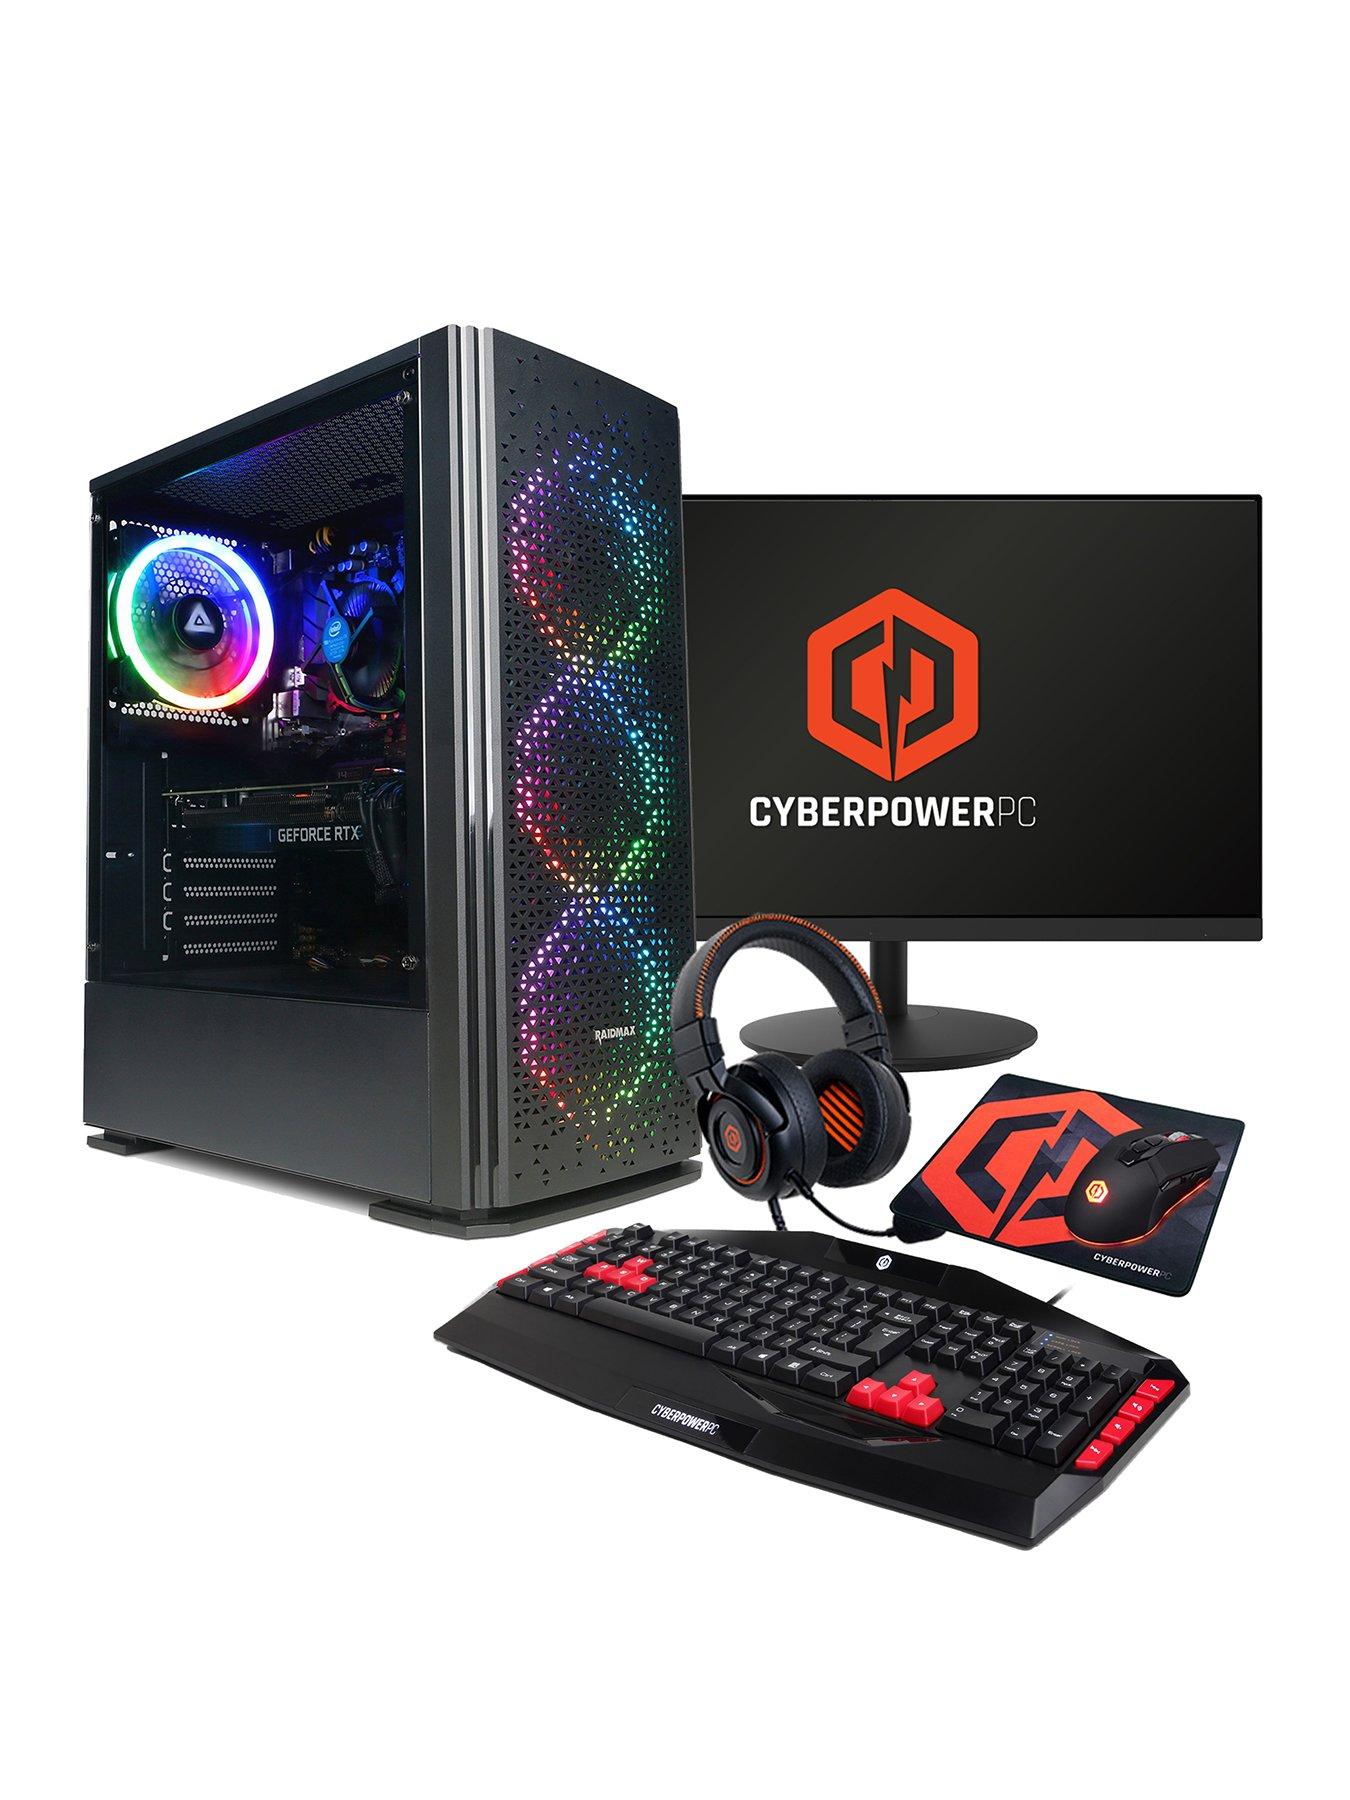 I Want It All- PC and Console Gaming｜Prebuilt Gaming PC, Desktop Computer｜ MSI